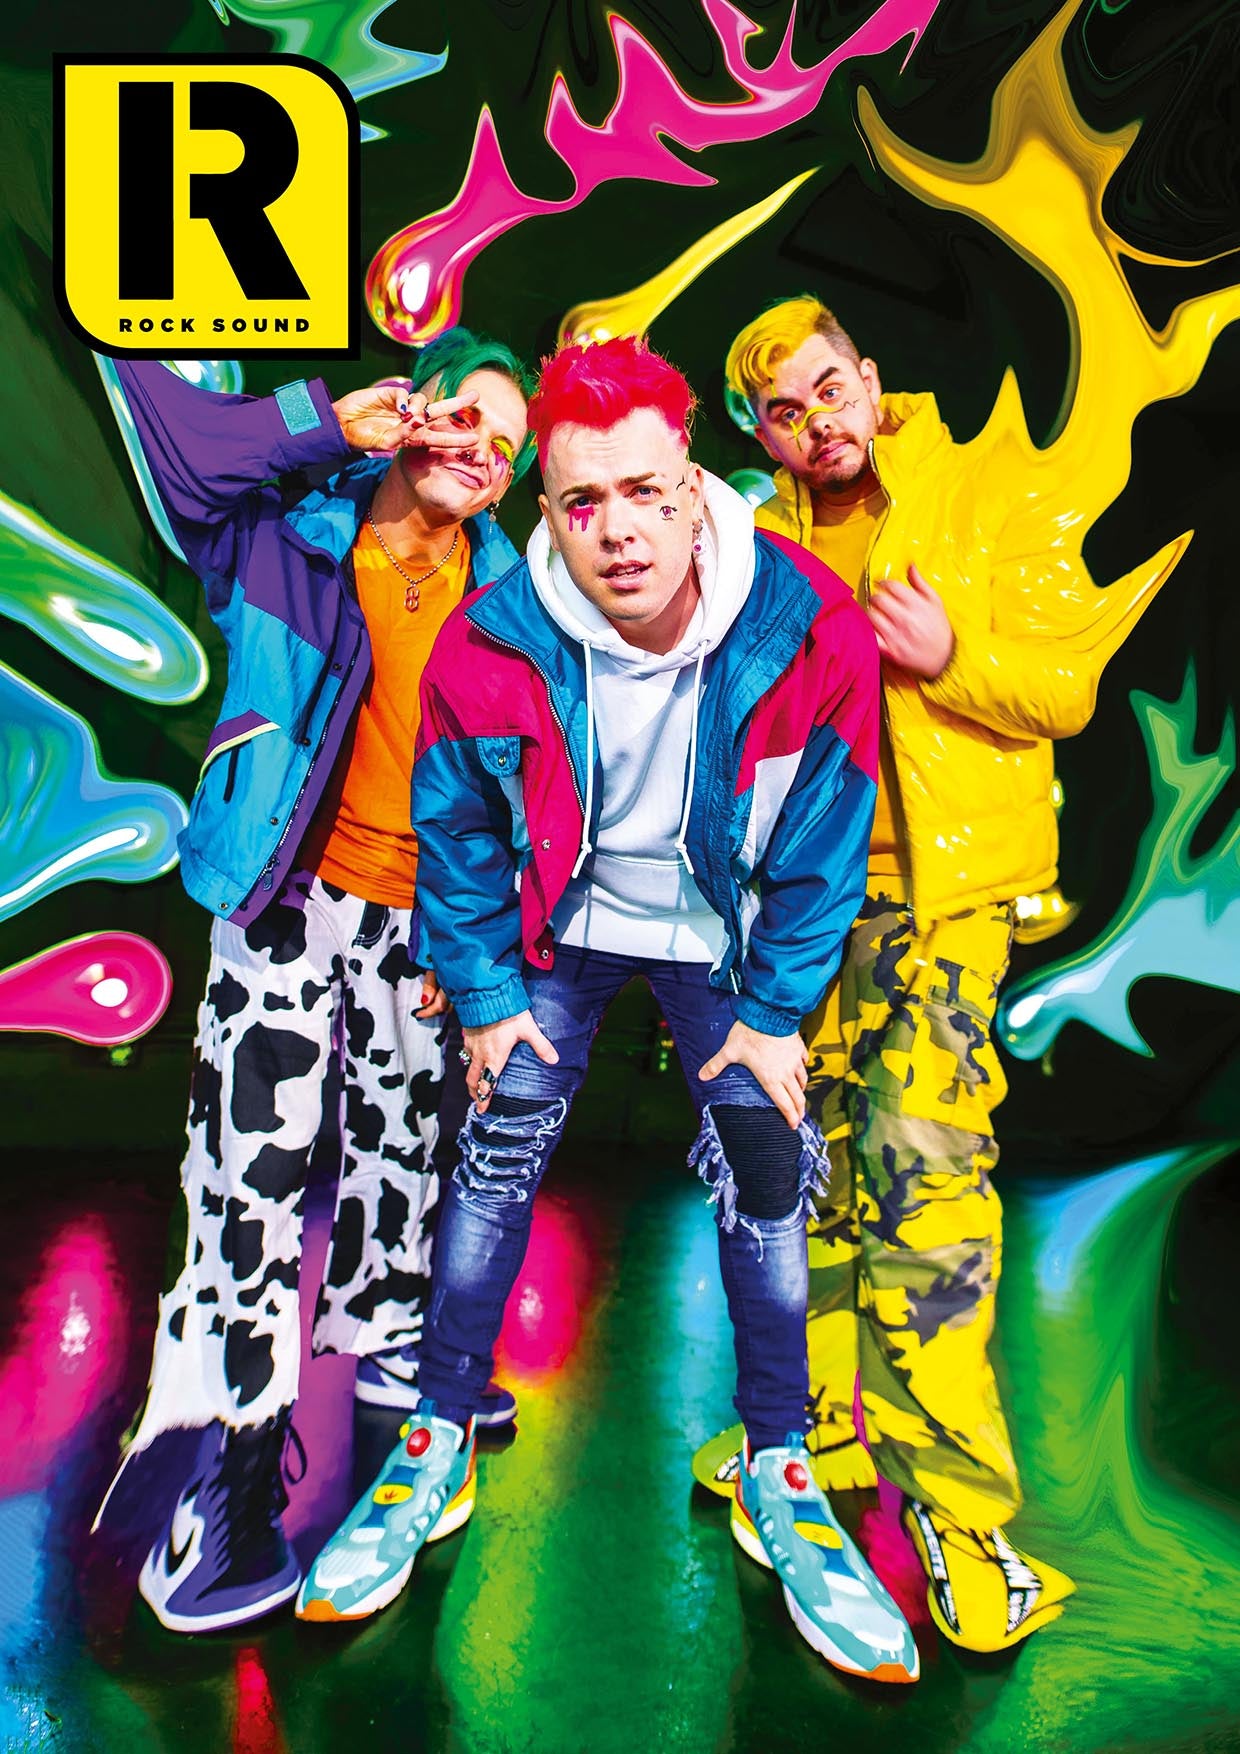 Set It Off Magazine - issue 287 Please welcome the one and only Set It Off back to the cover of Rock Sound! Inside, Cody, Maxx and Zach welcome us into their bold new era, and tell the story of Elsewhere, their greatest album yet across 18+ pages and a brand new photoshoot